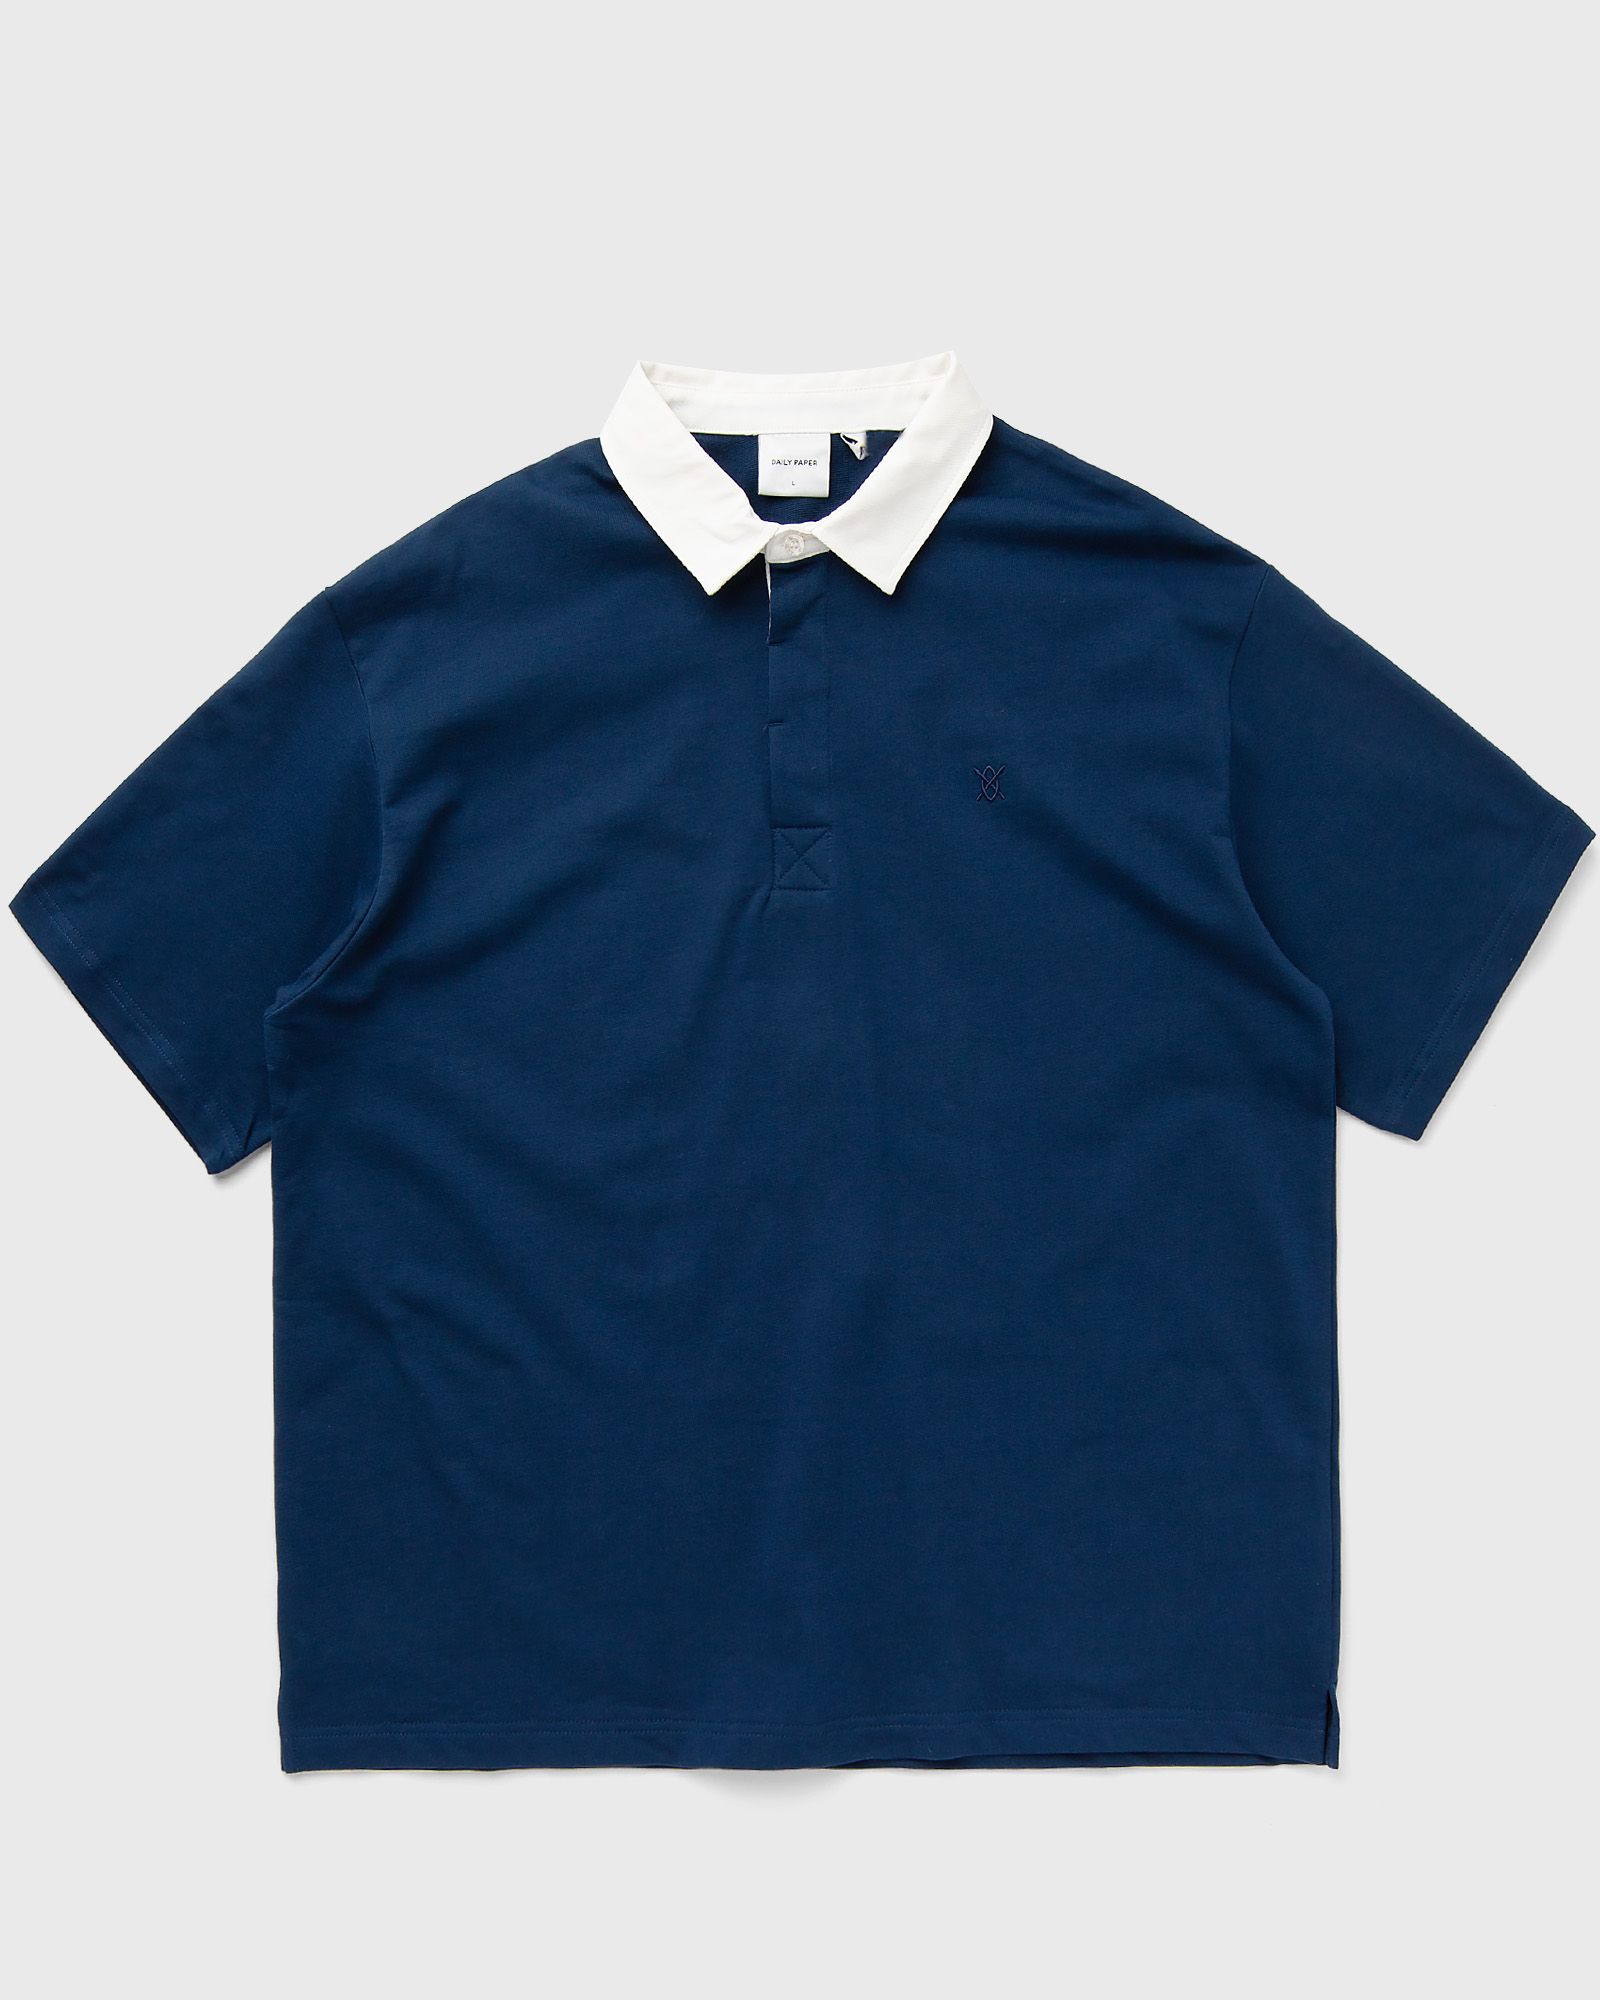 Daily Paper Shield ss polo t-shirt men Polos blue in Größe:XL von Daily Paper